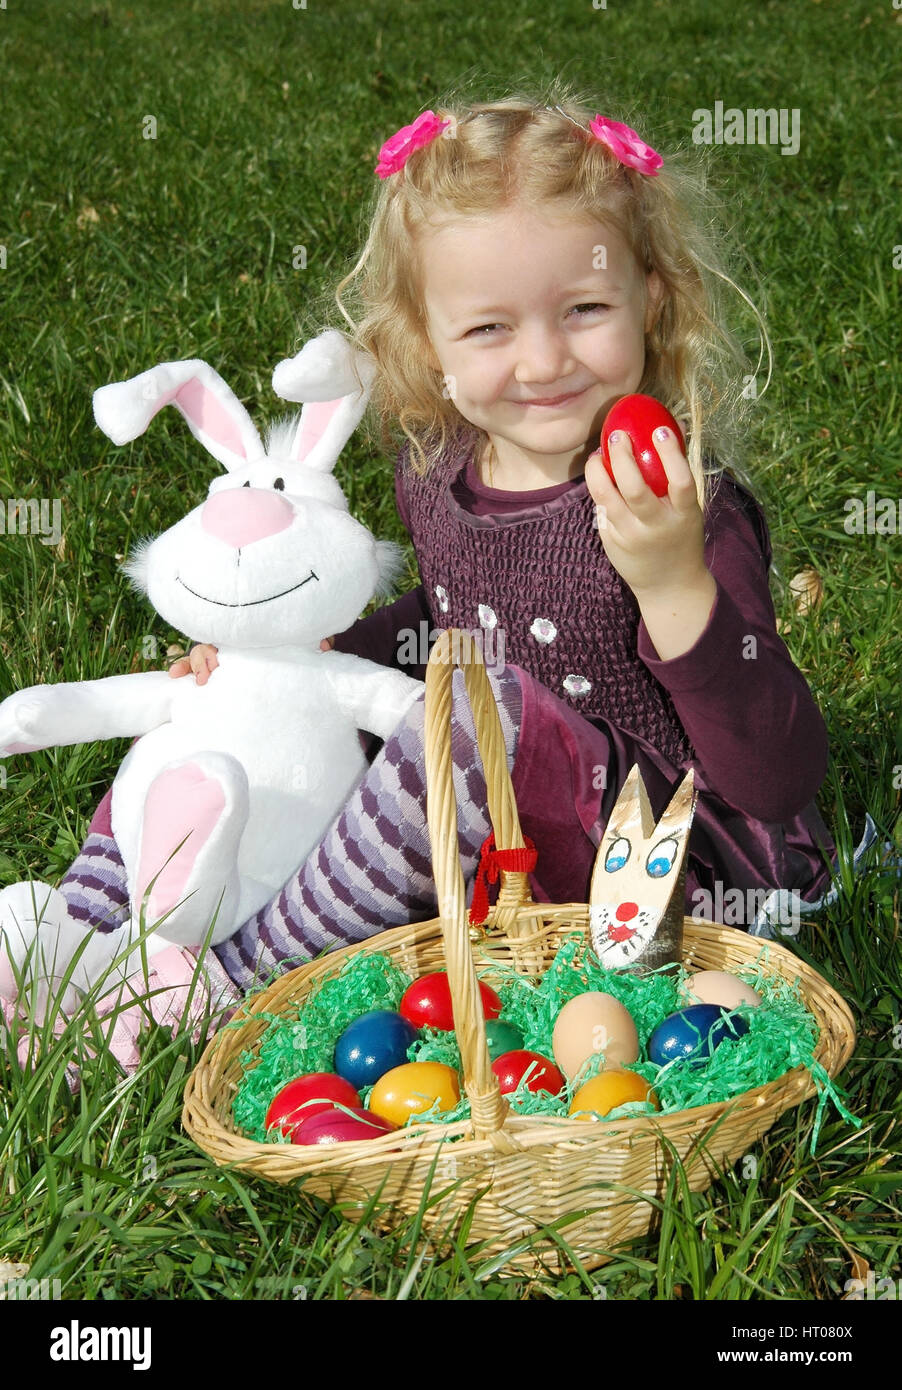 Maedchen mit Osternest in der Wiese - girl with Easter nest in meadow Stock Photo